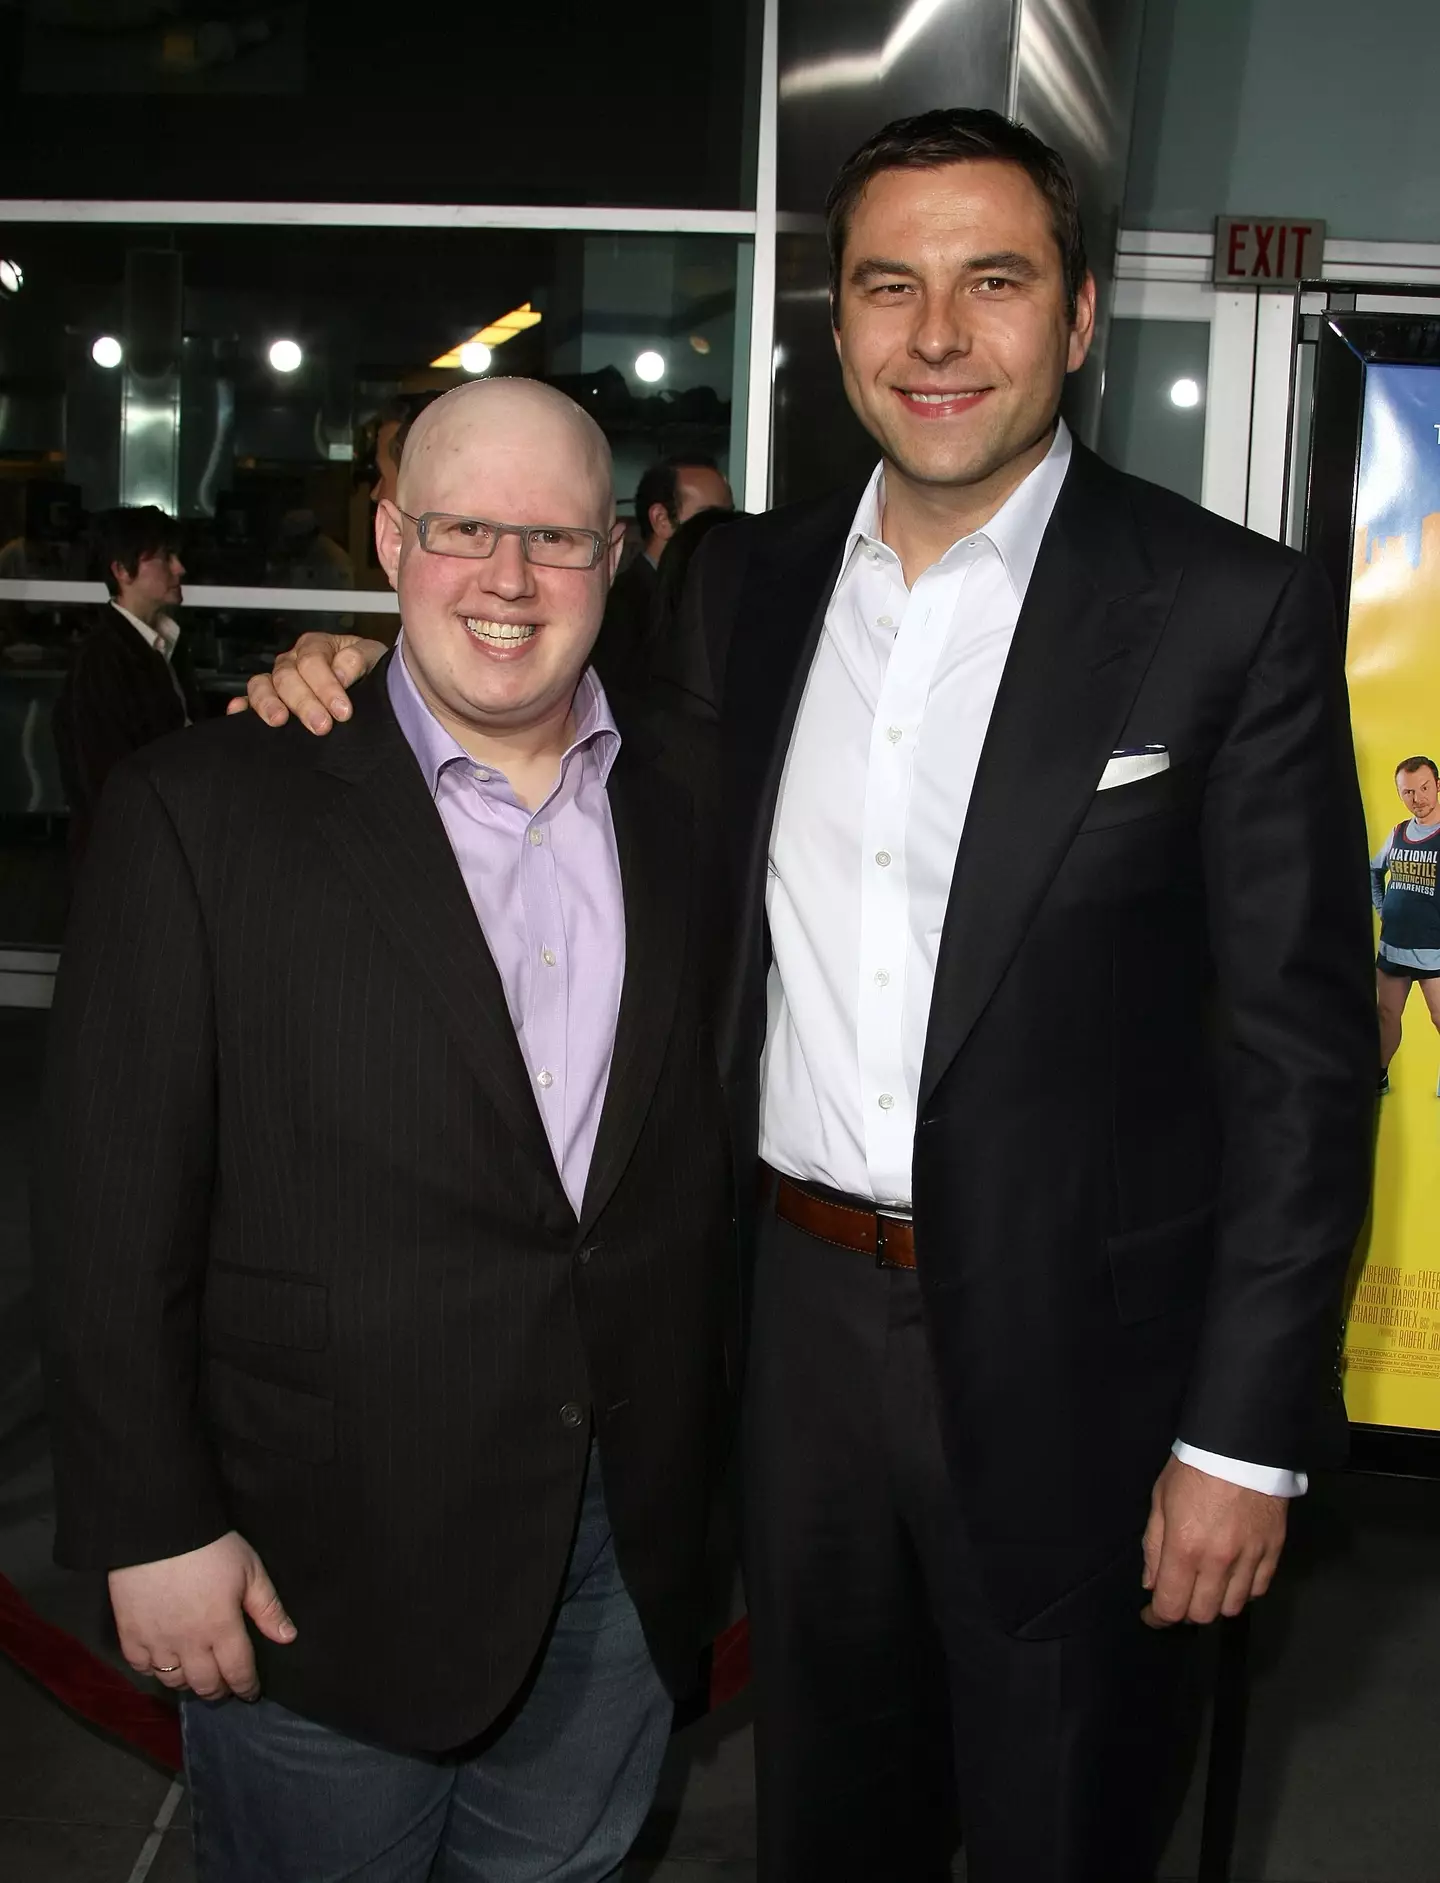 Matt Lucas and David Walliams are reuniting for a comedy sketch for Red Nose Day (